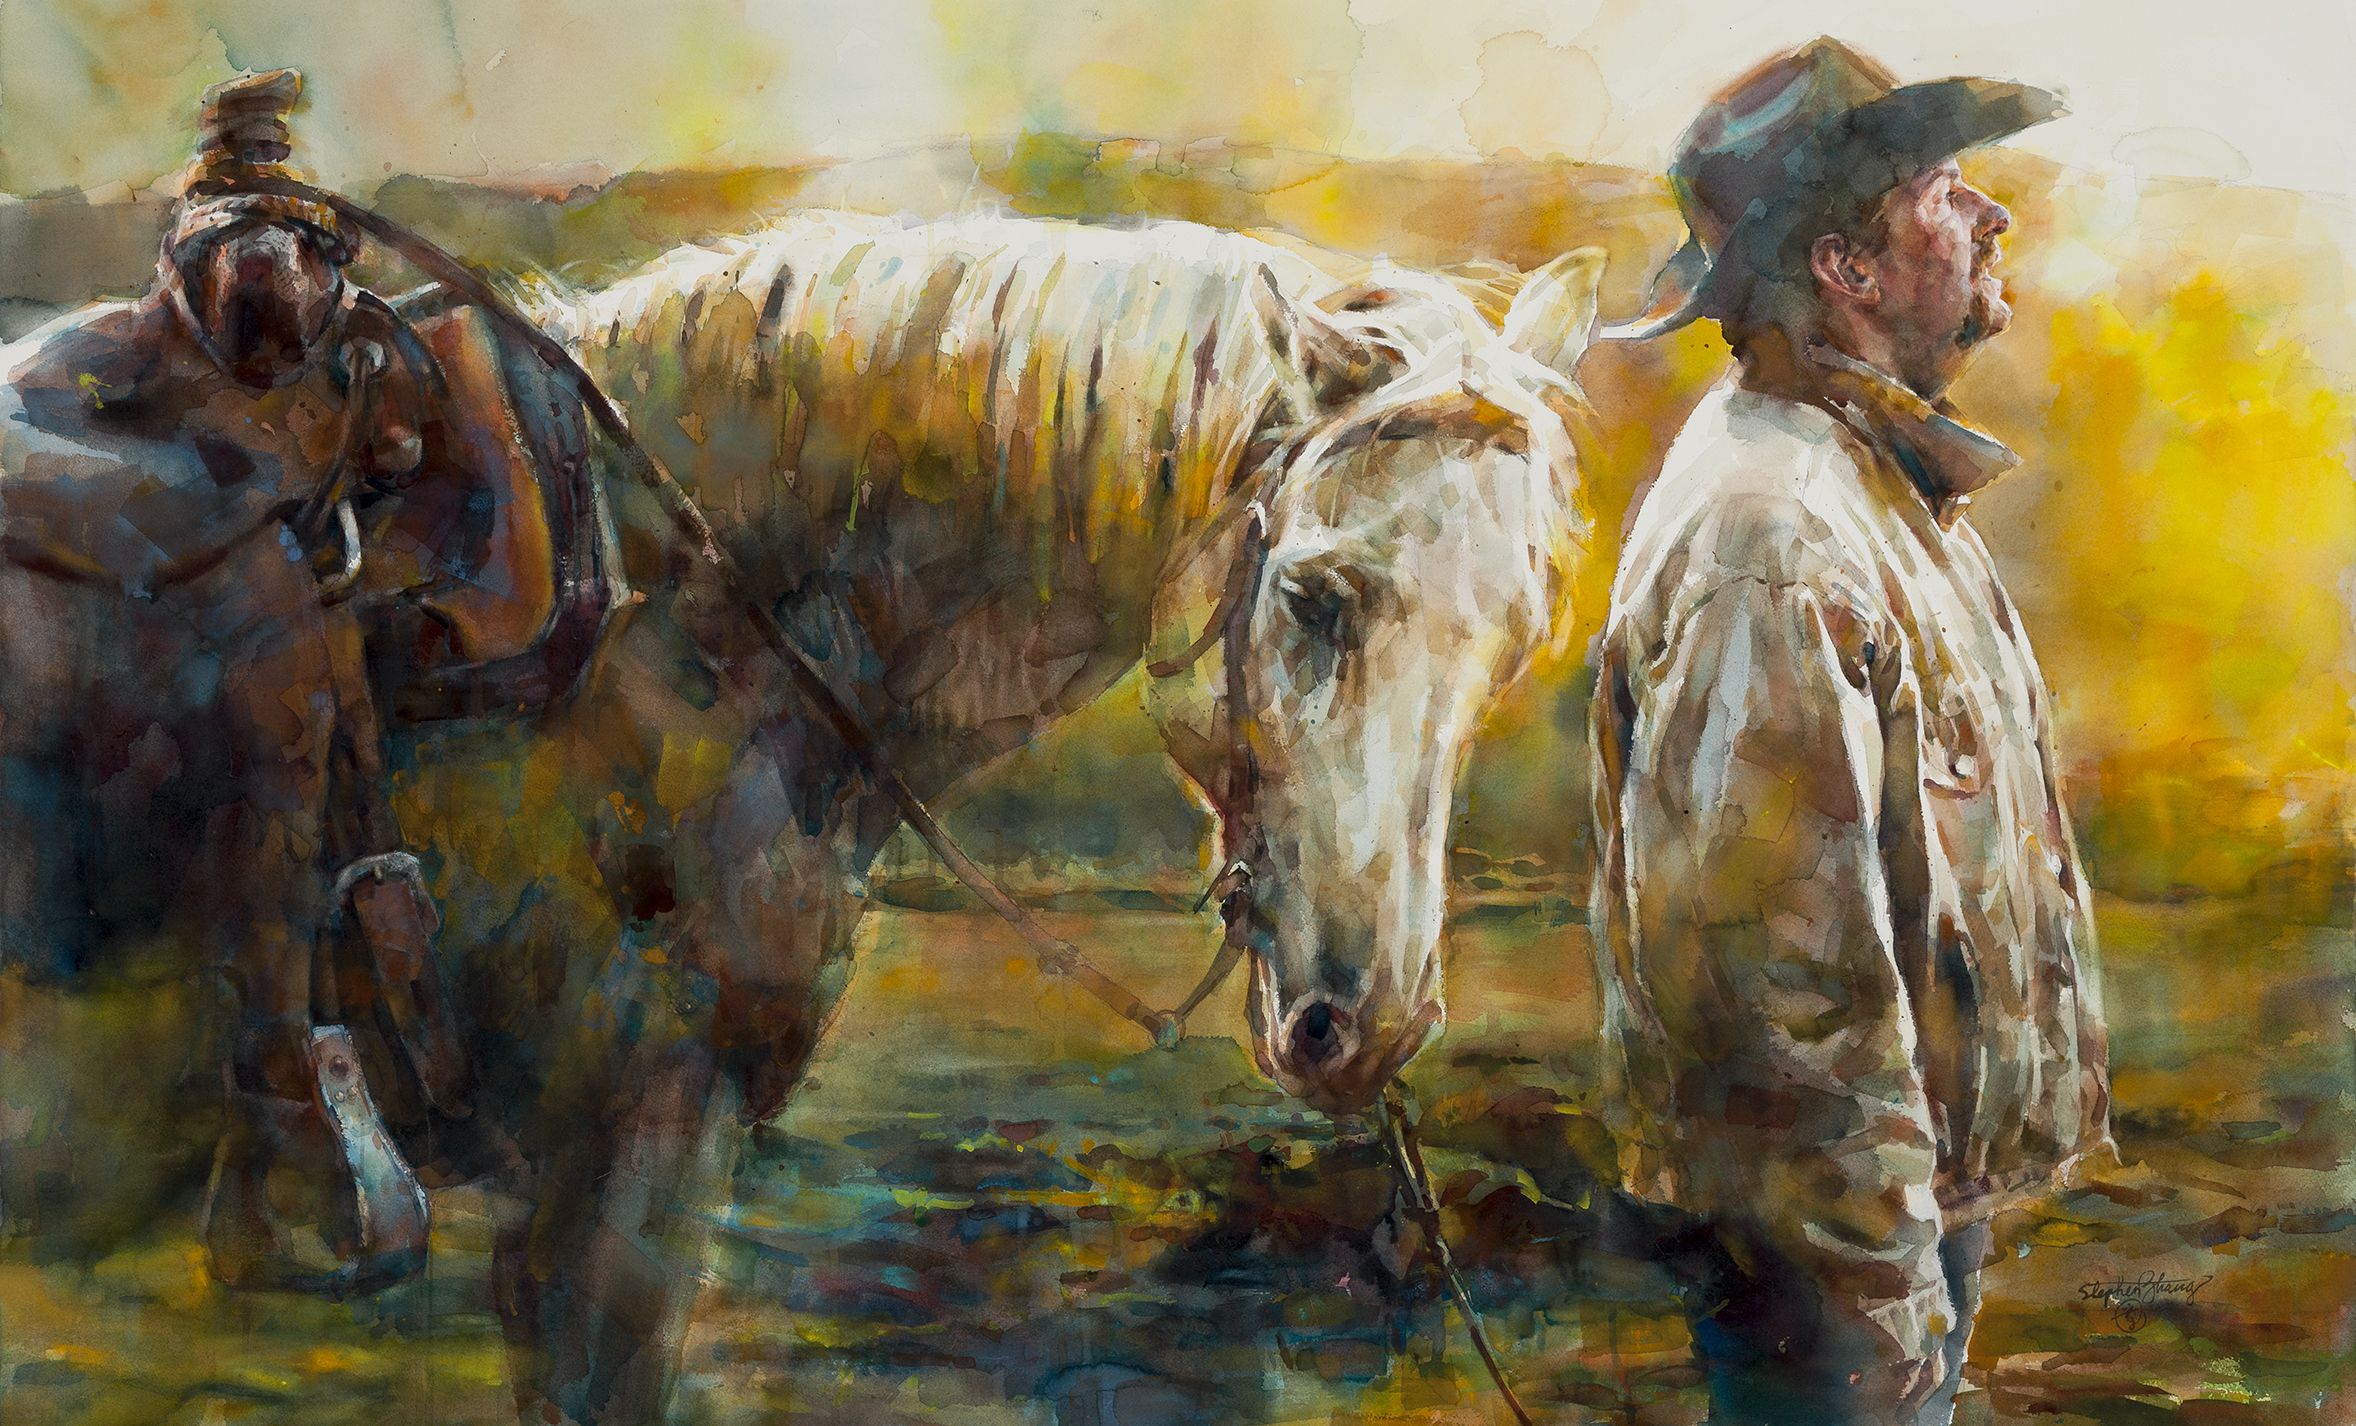 A watercolor painting of a cowboy standing next to a horse